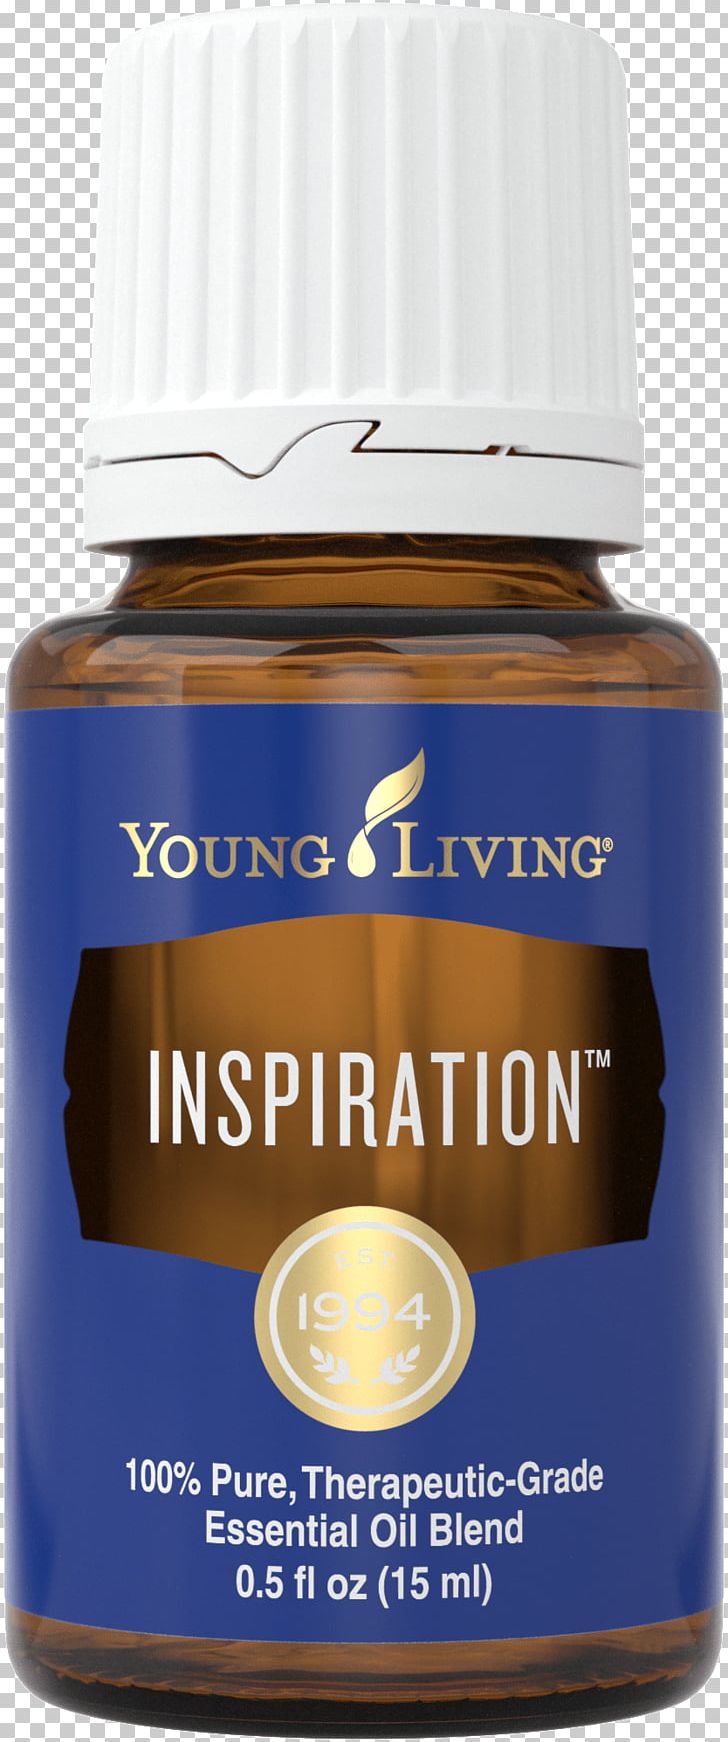 Young Living Essential Oils Australia Young Living Essential Oils Australia Liquid PNG, Clipart, Australia, Autumn Benefits, Dietary Supplement, Dream, Dreamcatcher Free PNG Download